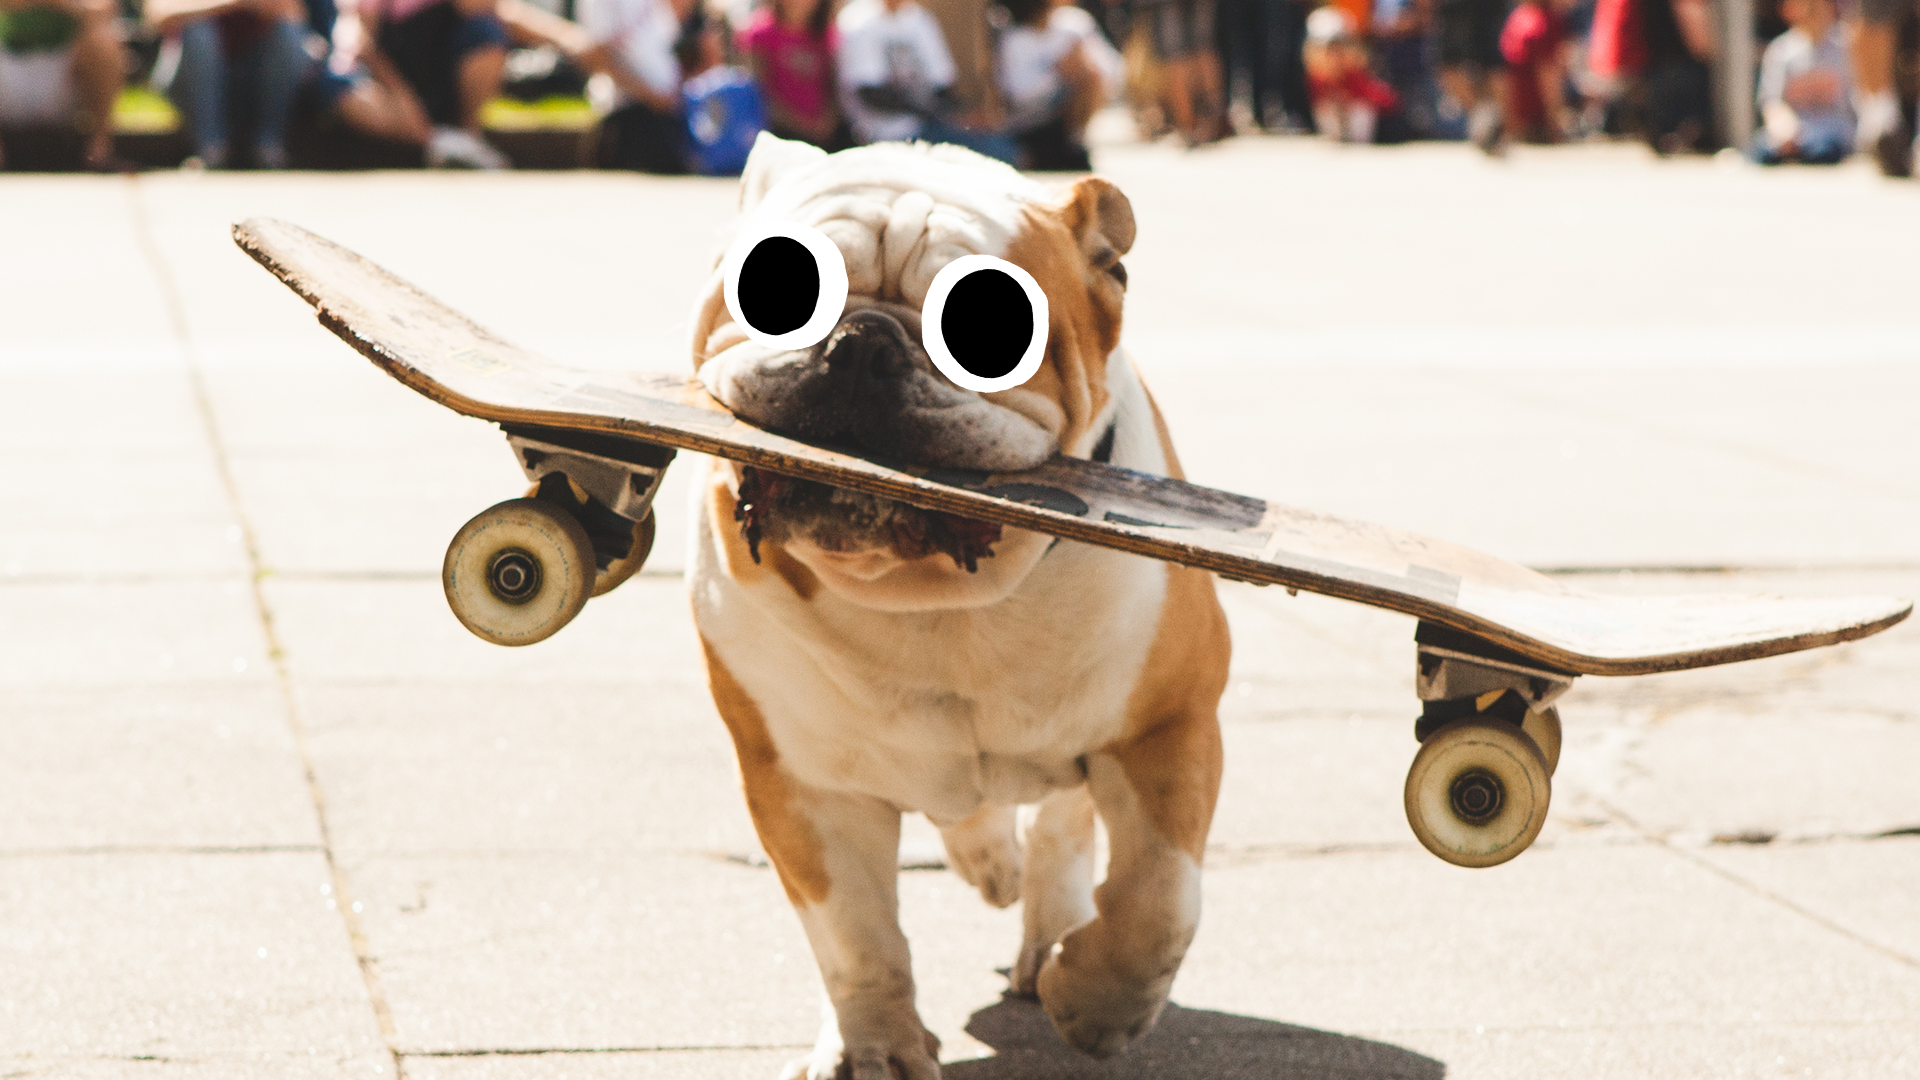 Dog with skateboard in mouth